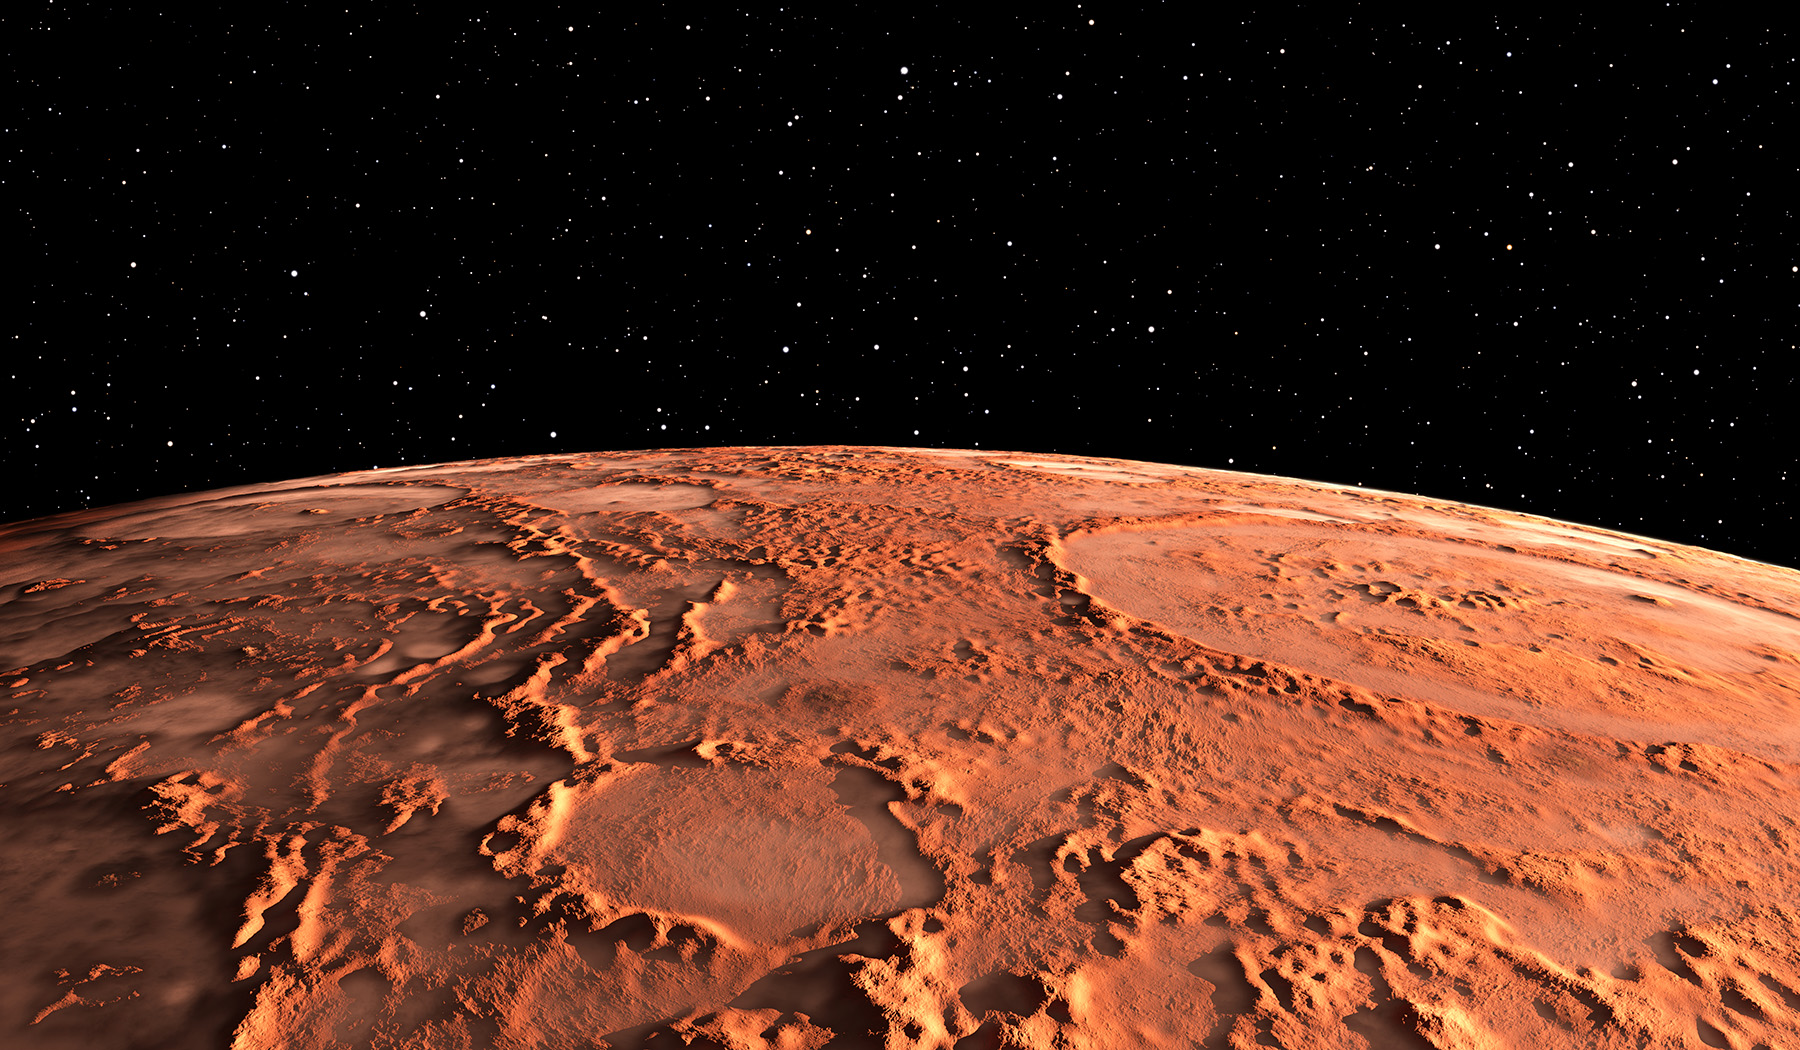 Photograph shows the surface of Mars with canyons, volcanoes, and polar ice caps. 